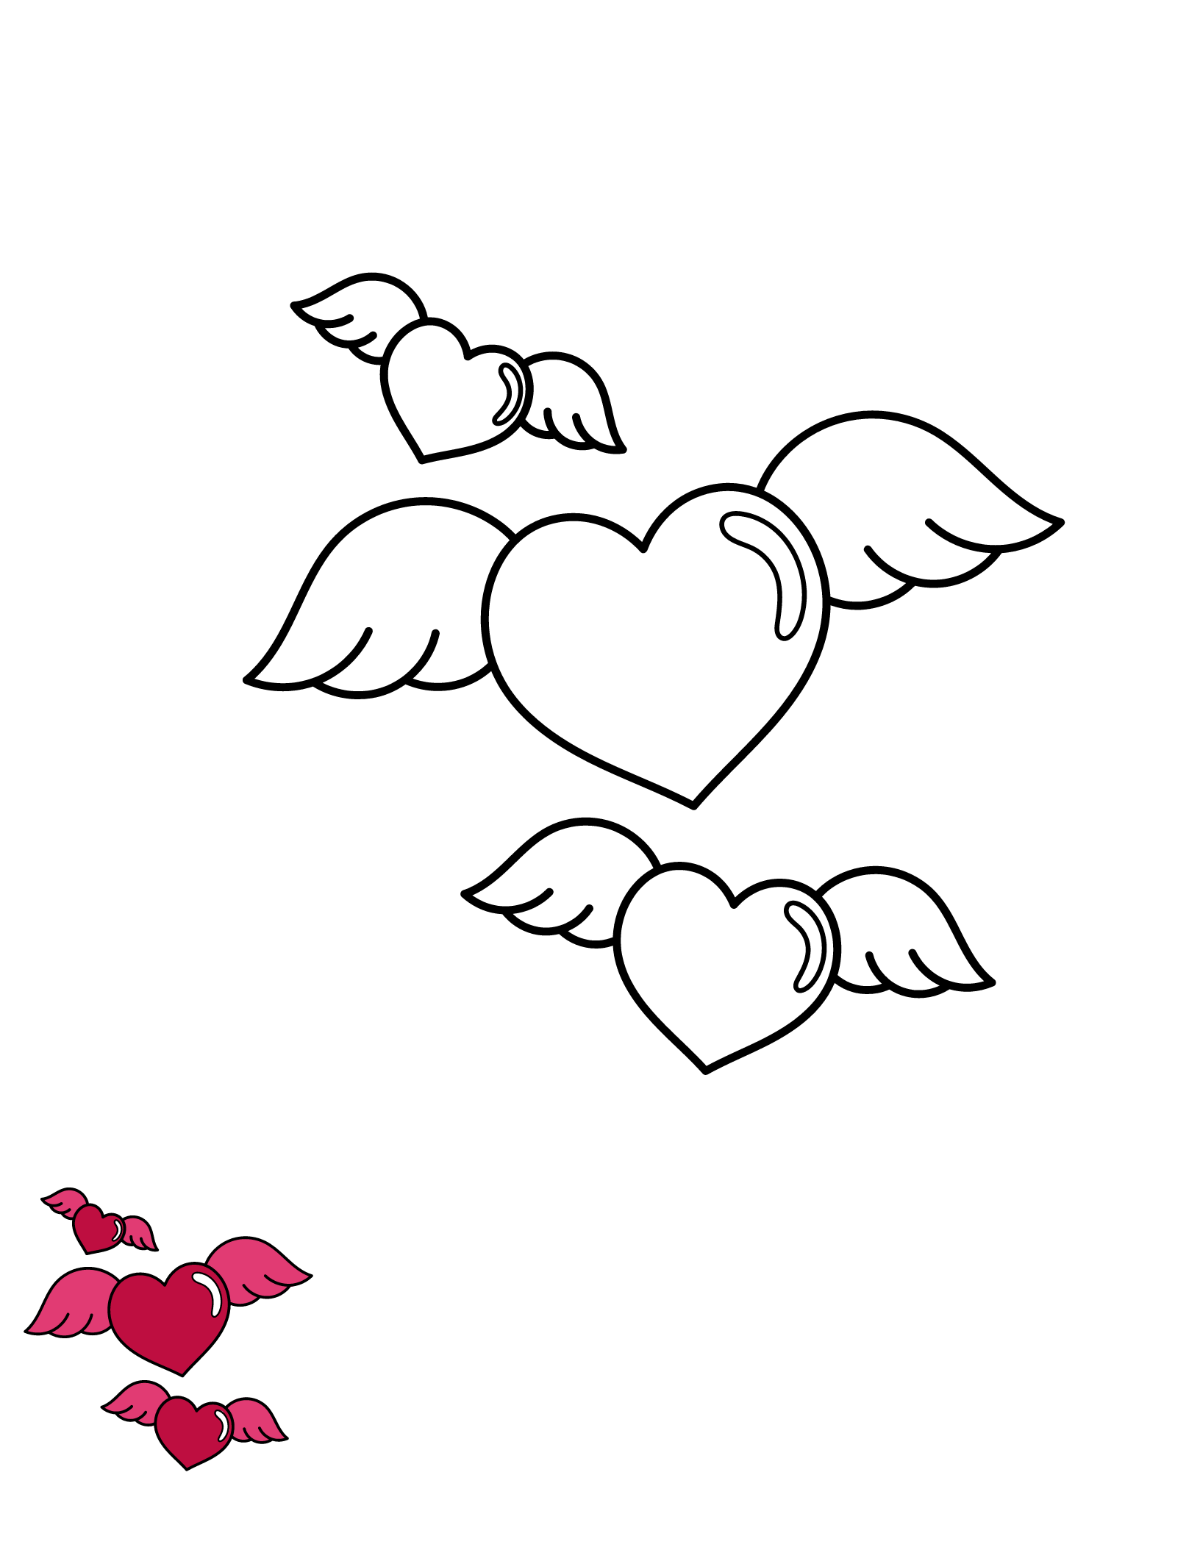 Heart With Wings Coloring Page Template